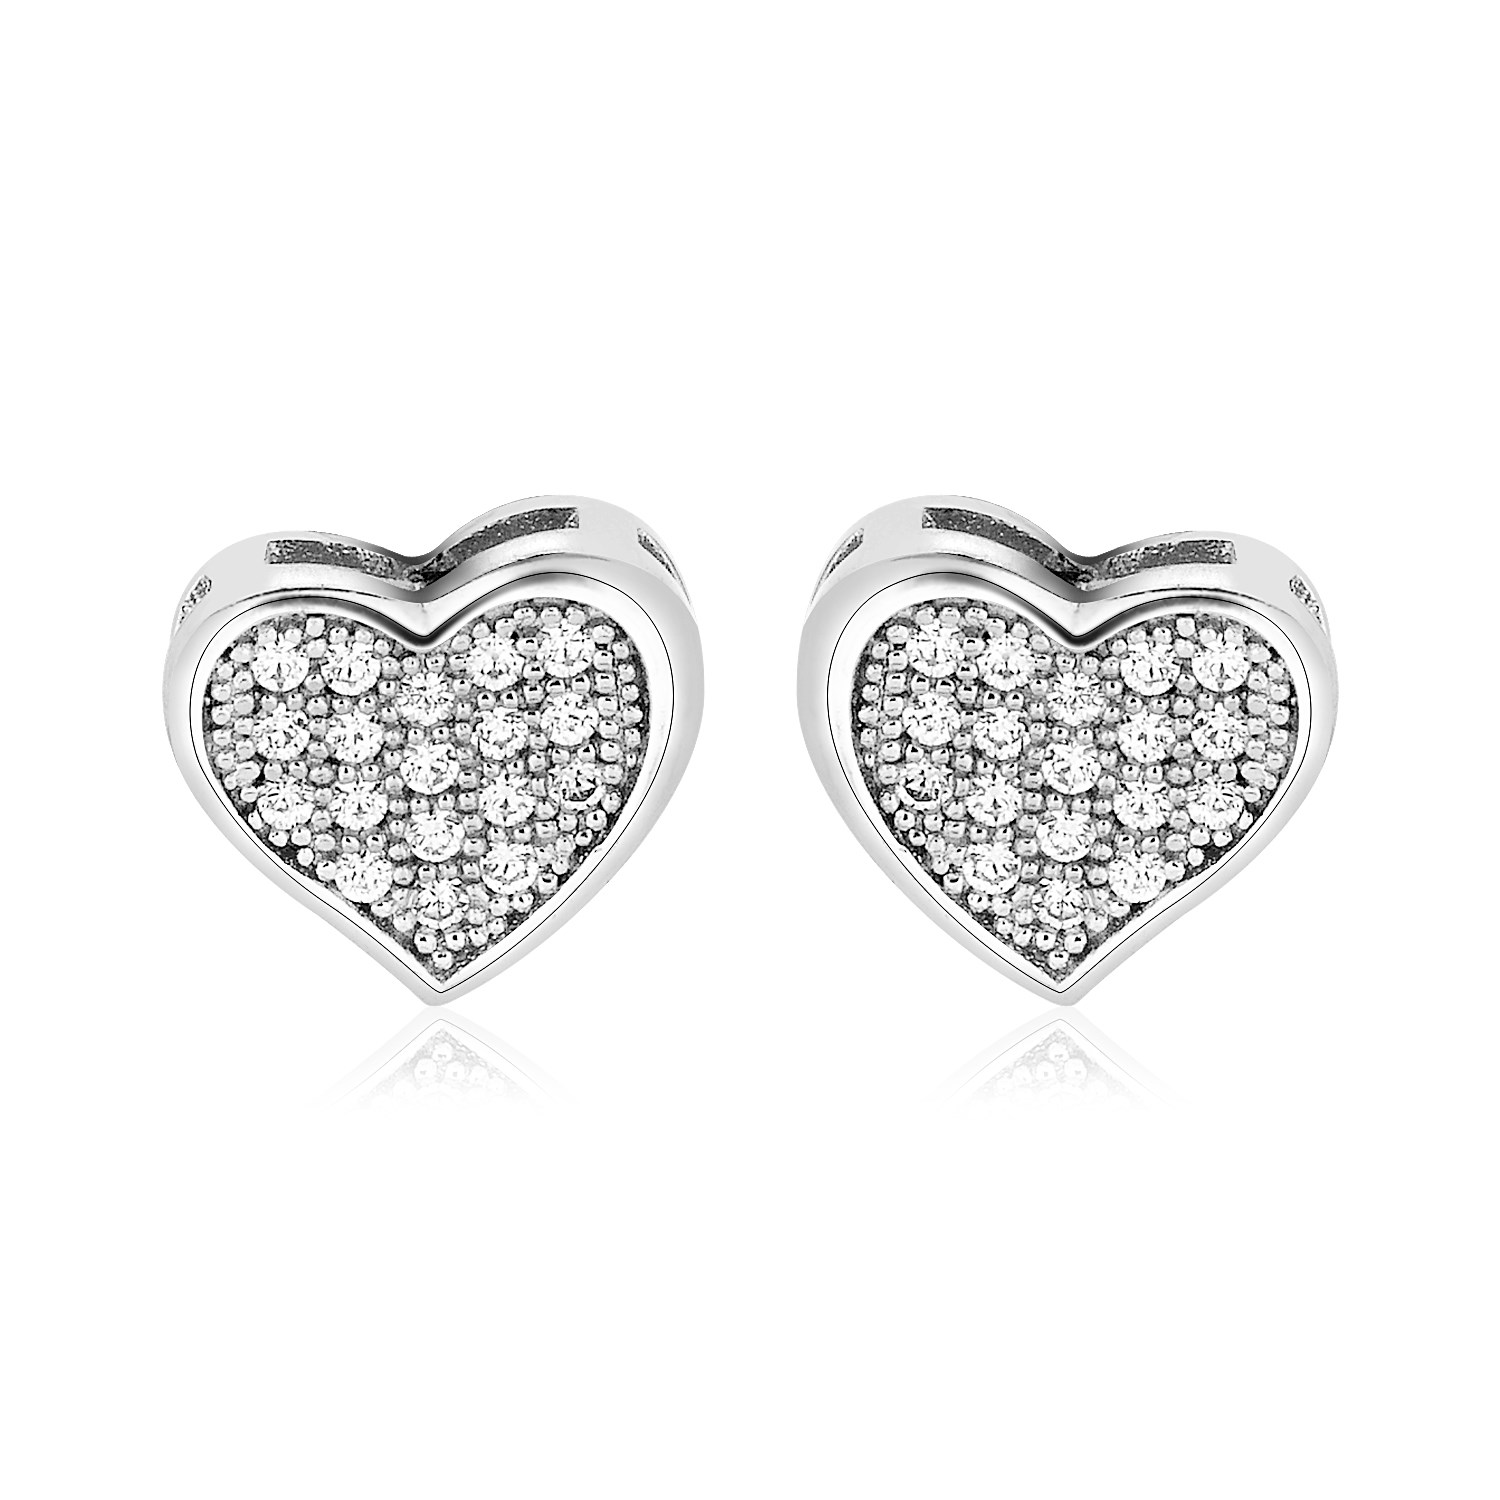 Sterling Silver Heart Earrings with Cubic Zirconias - Richard Cannon ...